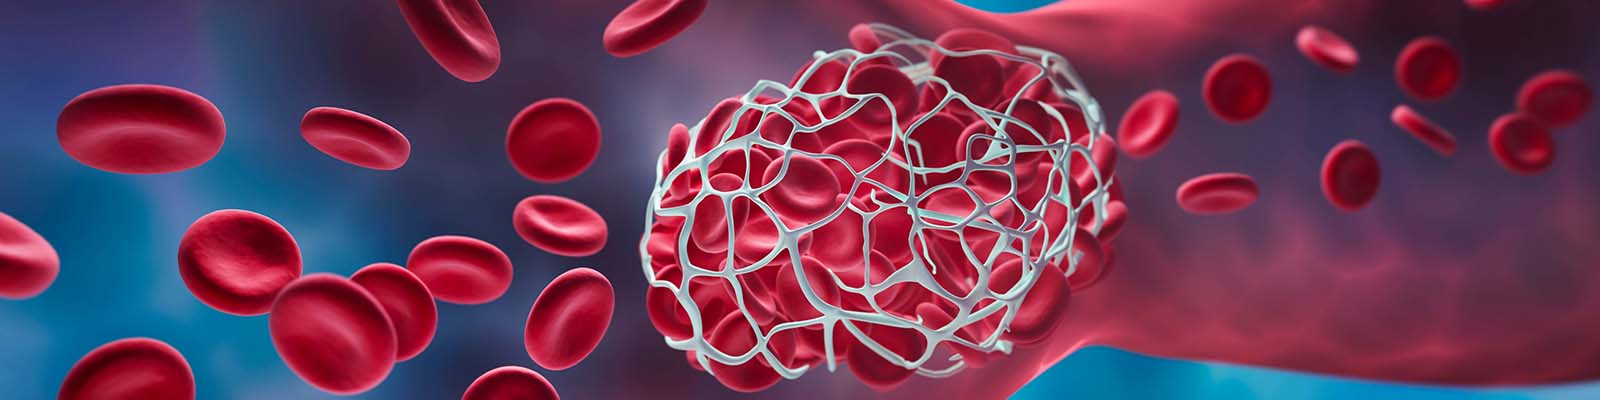 How to Prevent Blood Clots: 6 Ways to Reduce Your Risk